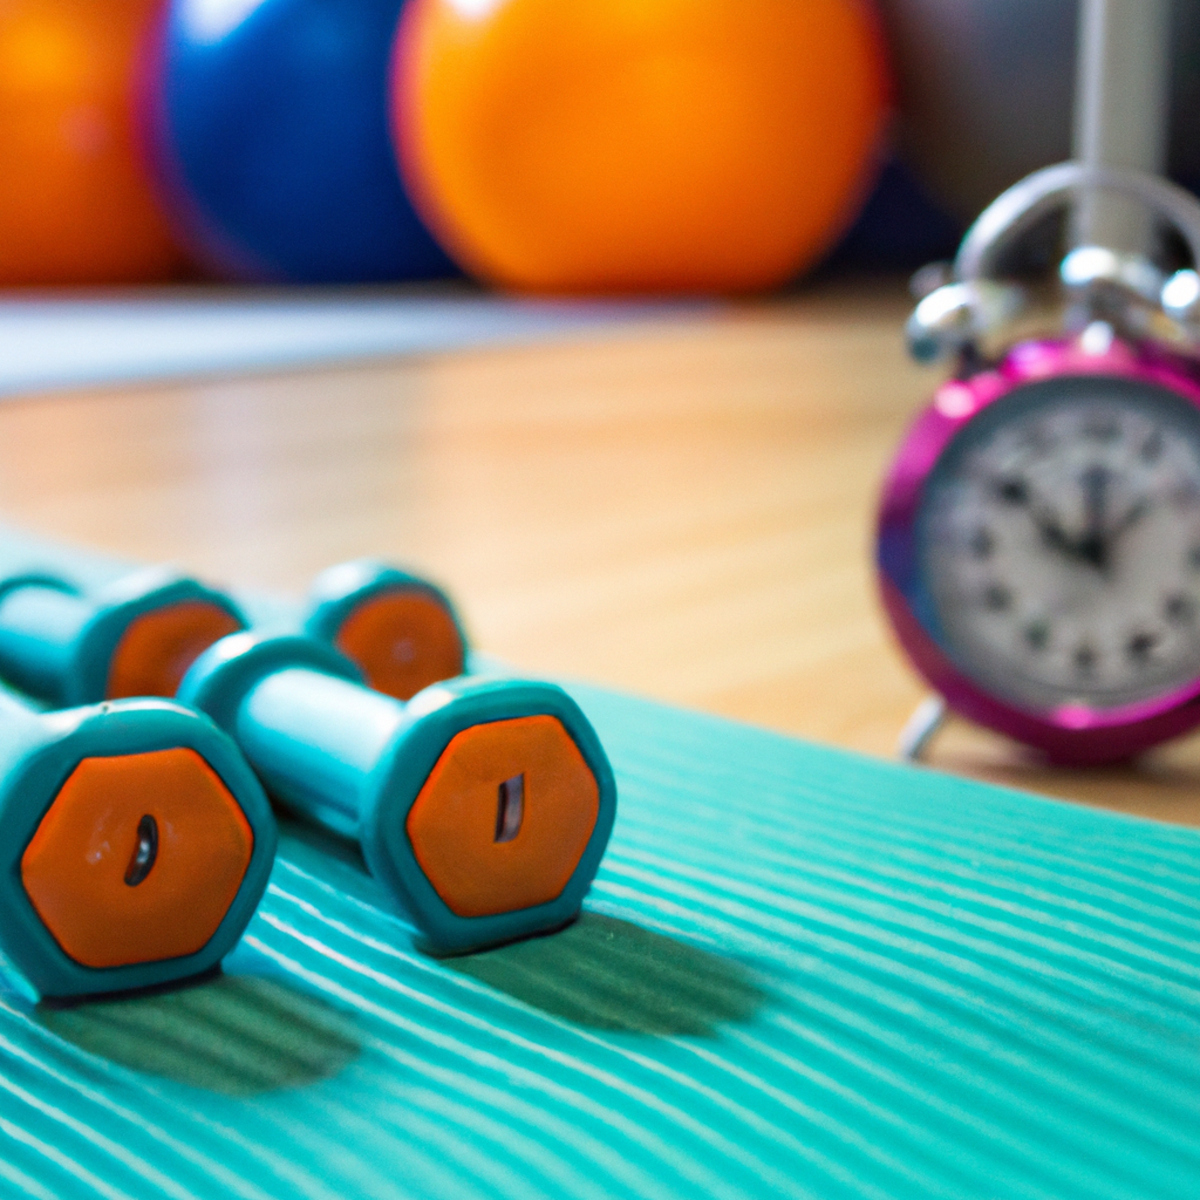 The photo captures a set of colorful dumbbells arranged neatly on a yoga mat, with a stopwatch placed in the center. The background shows a gym with other fitness equipment, but the focus remains on the objects in the foreground. The dumbbells range from light to heavy, indicating the variety of exercises that can be performed during a HIIT workout. The stopwatch suggests the importance of timing and intensity in these workouts, emphasizing the need to push oneself to the limit in just 20 minutes. The overall composition of the photo is clean and minimalist, reflecting the simplicity and efficiency of HIIT workouts.